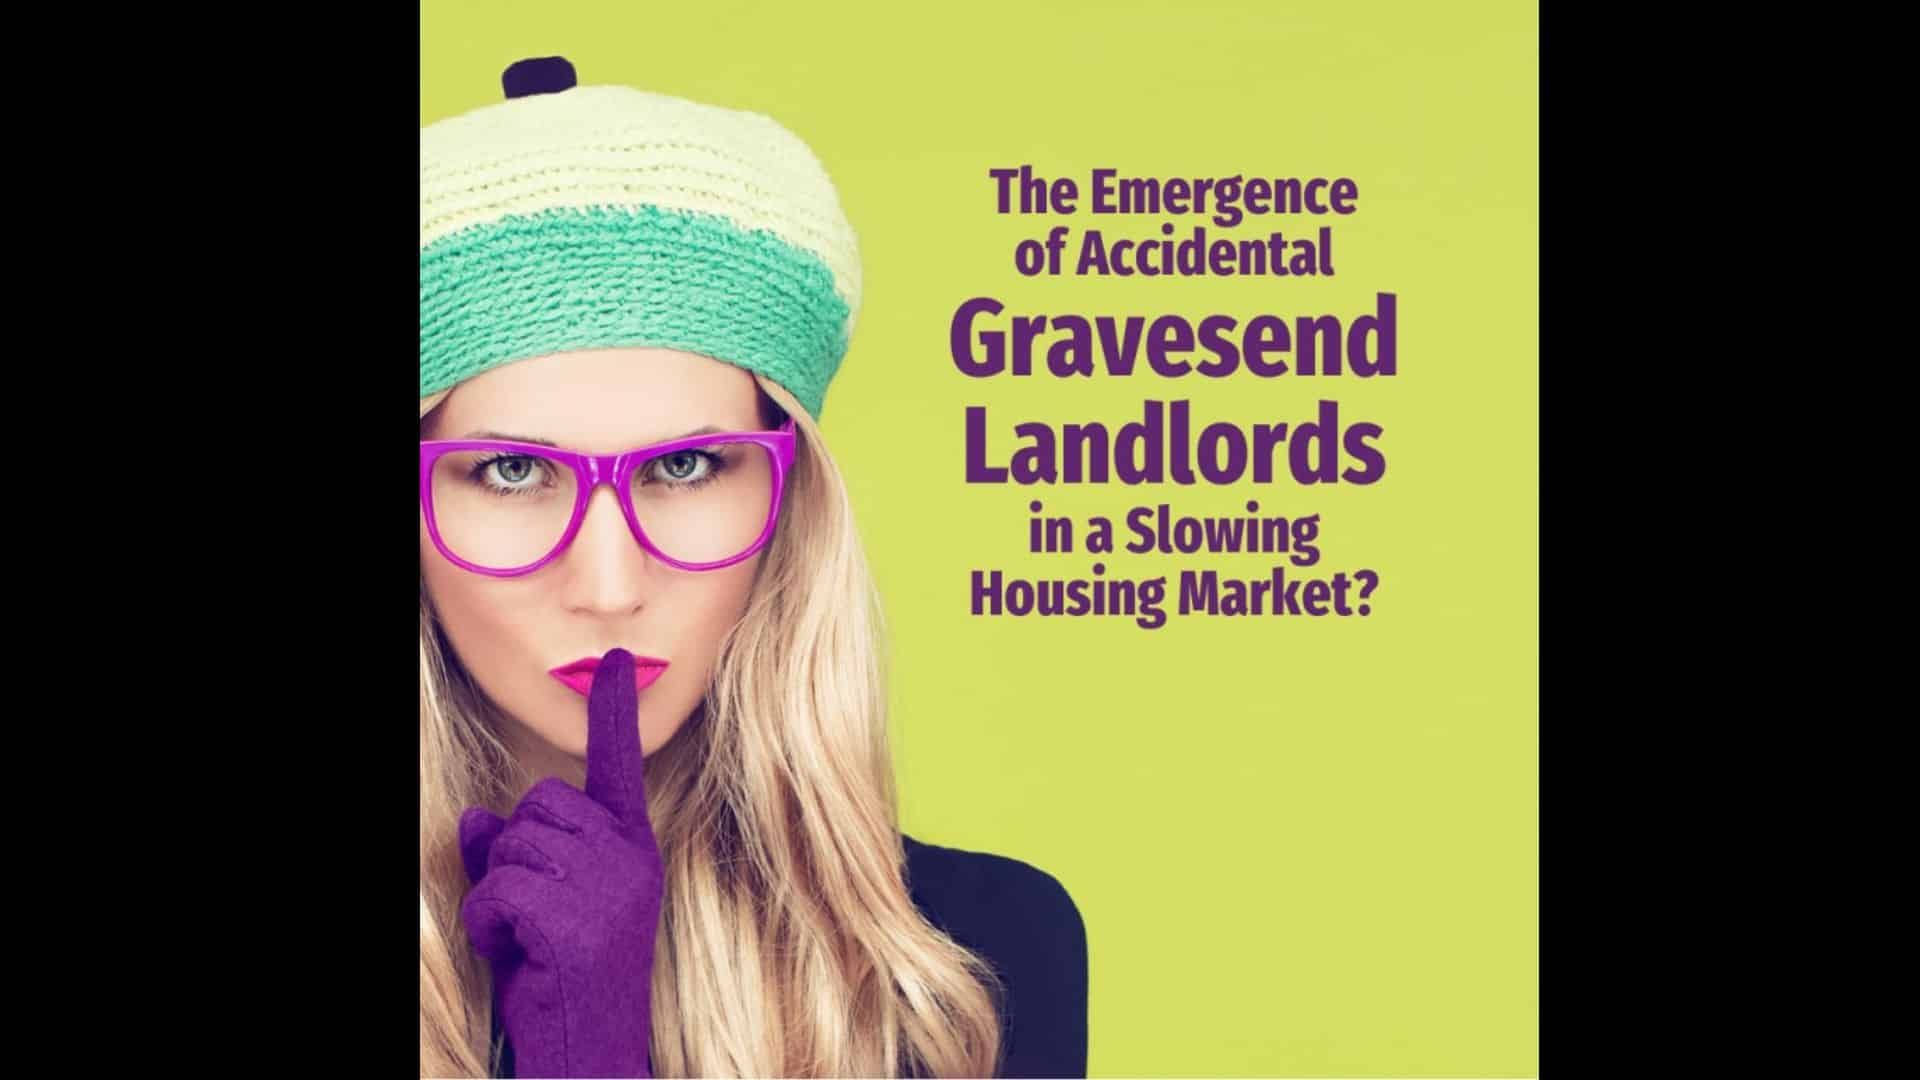 The Emergence Of Accidental Gravesend Landlords In A Slowing Housing Market?